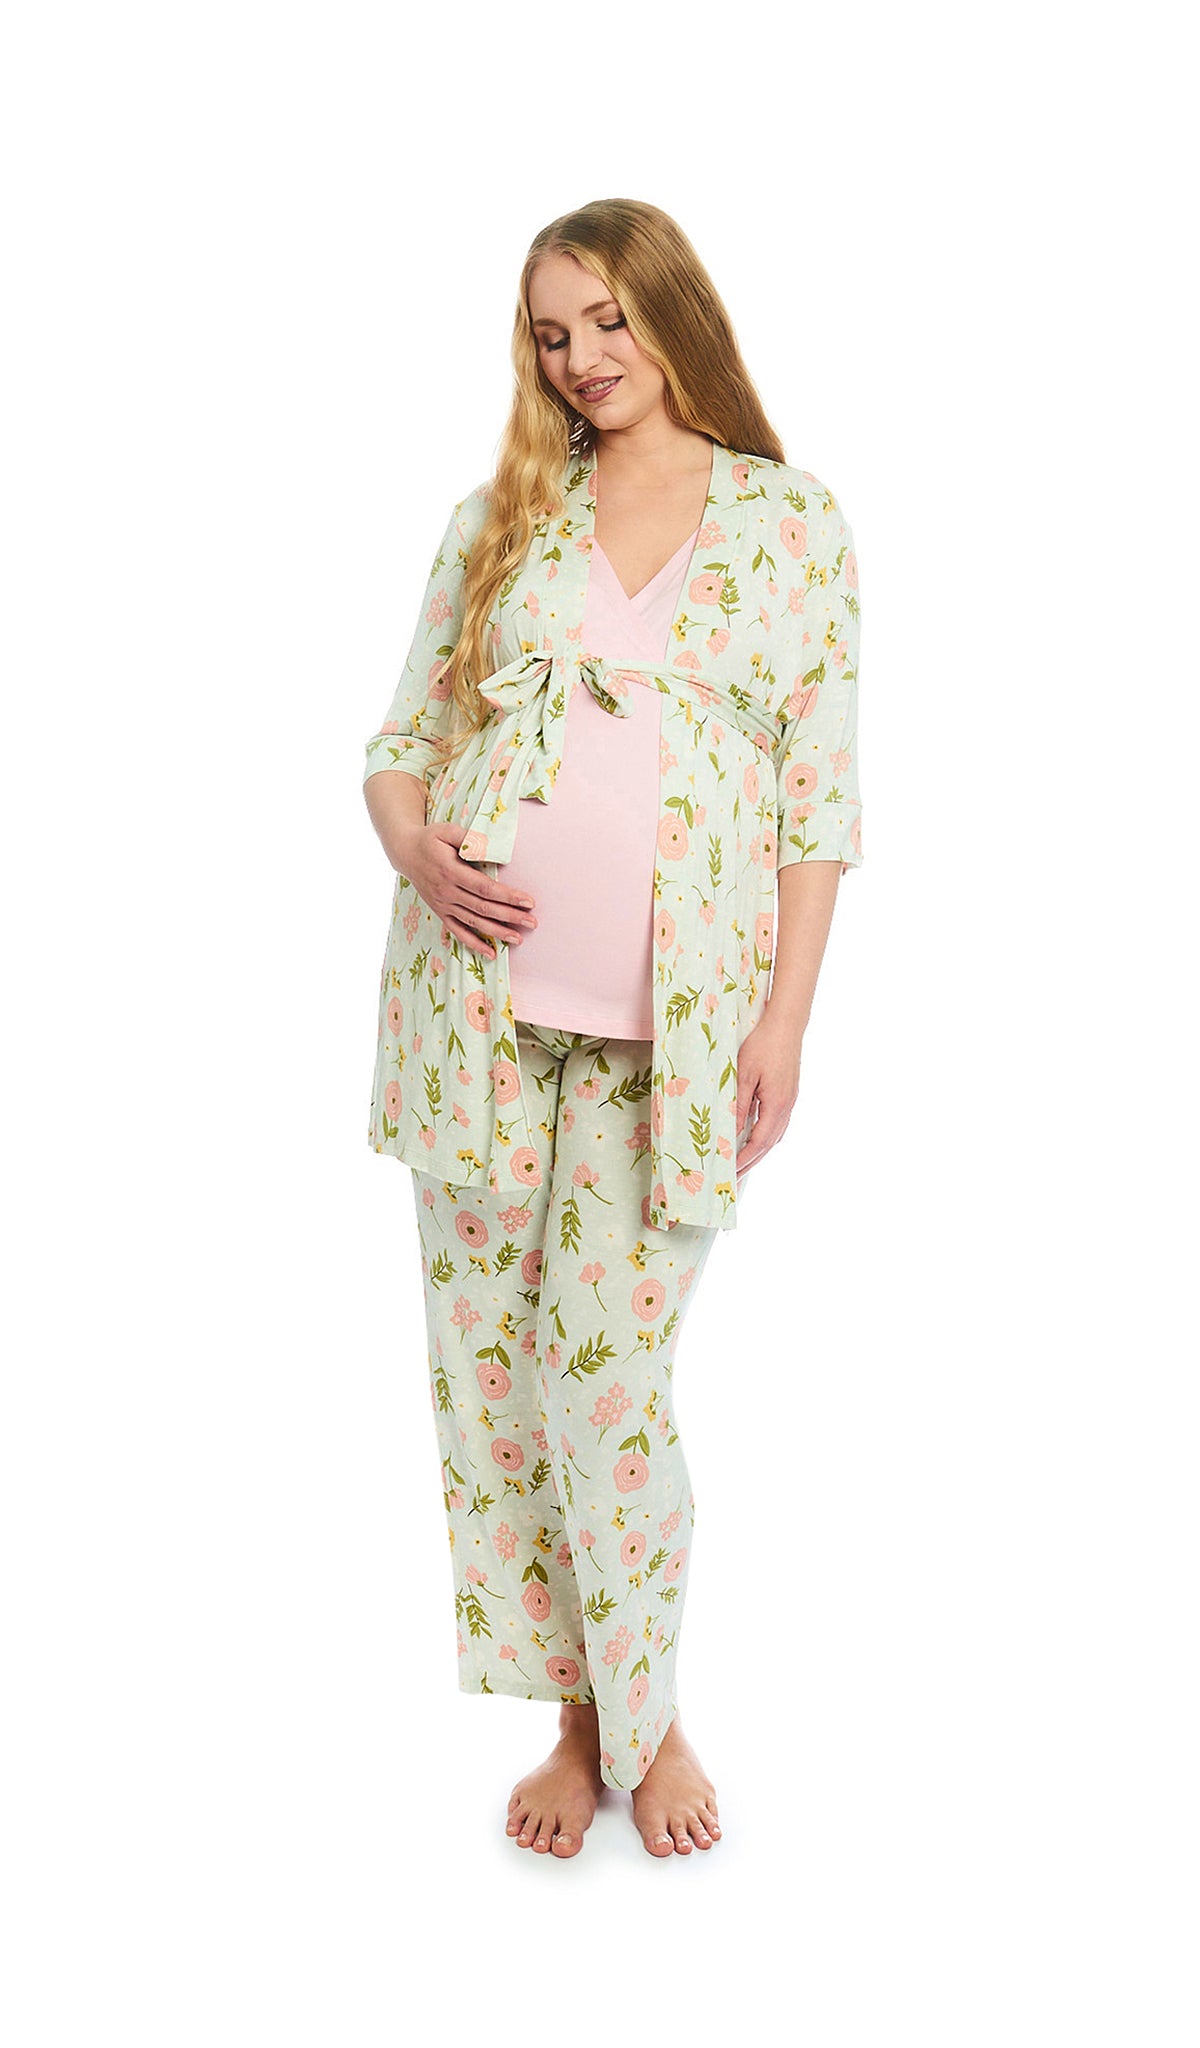 Carnation Analise 3-Piece Set. Pregnant woman wearing 3/4 sleeve robe, tank top and pant and one hand on belly.